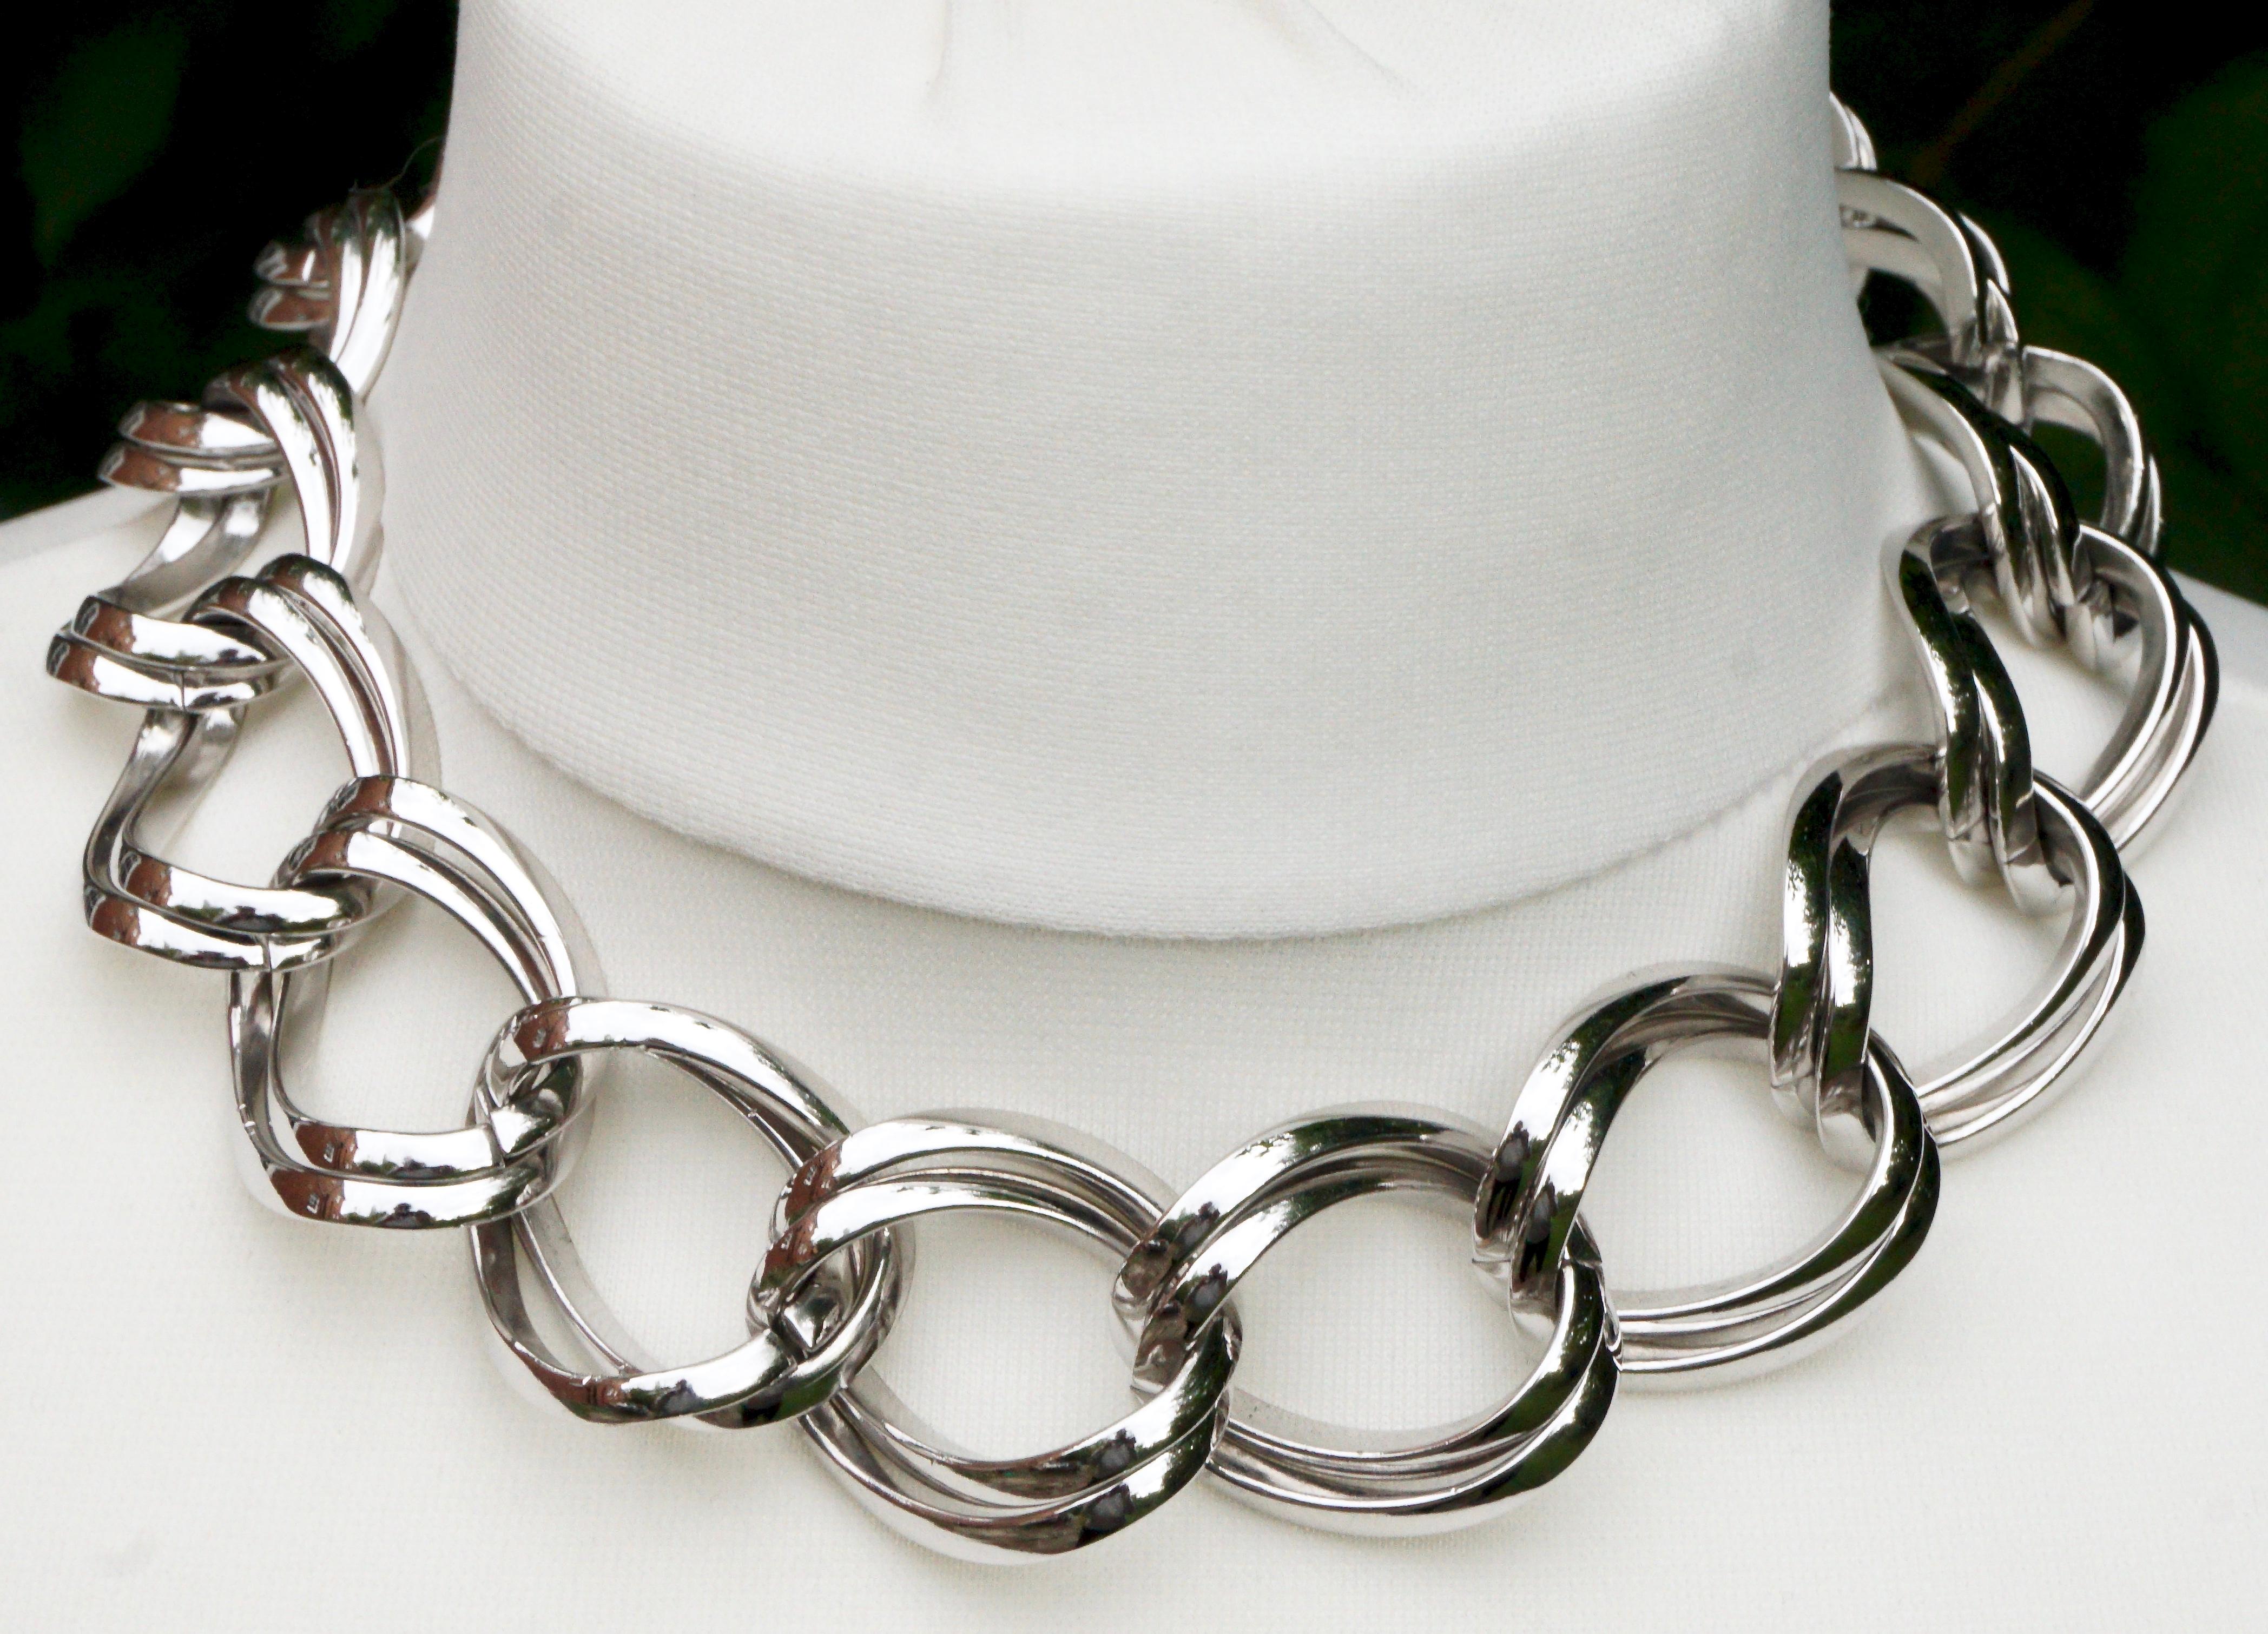 Nina Ricci silver plated double chain link collar / necklace. Length 43.5cm / 17.1 inches by width 2.8cm / 1.1 inch. The necklace is in very good condition. Circa 1980s.

This is a stylish vintage necklace in a classic smart and simple design that